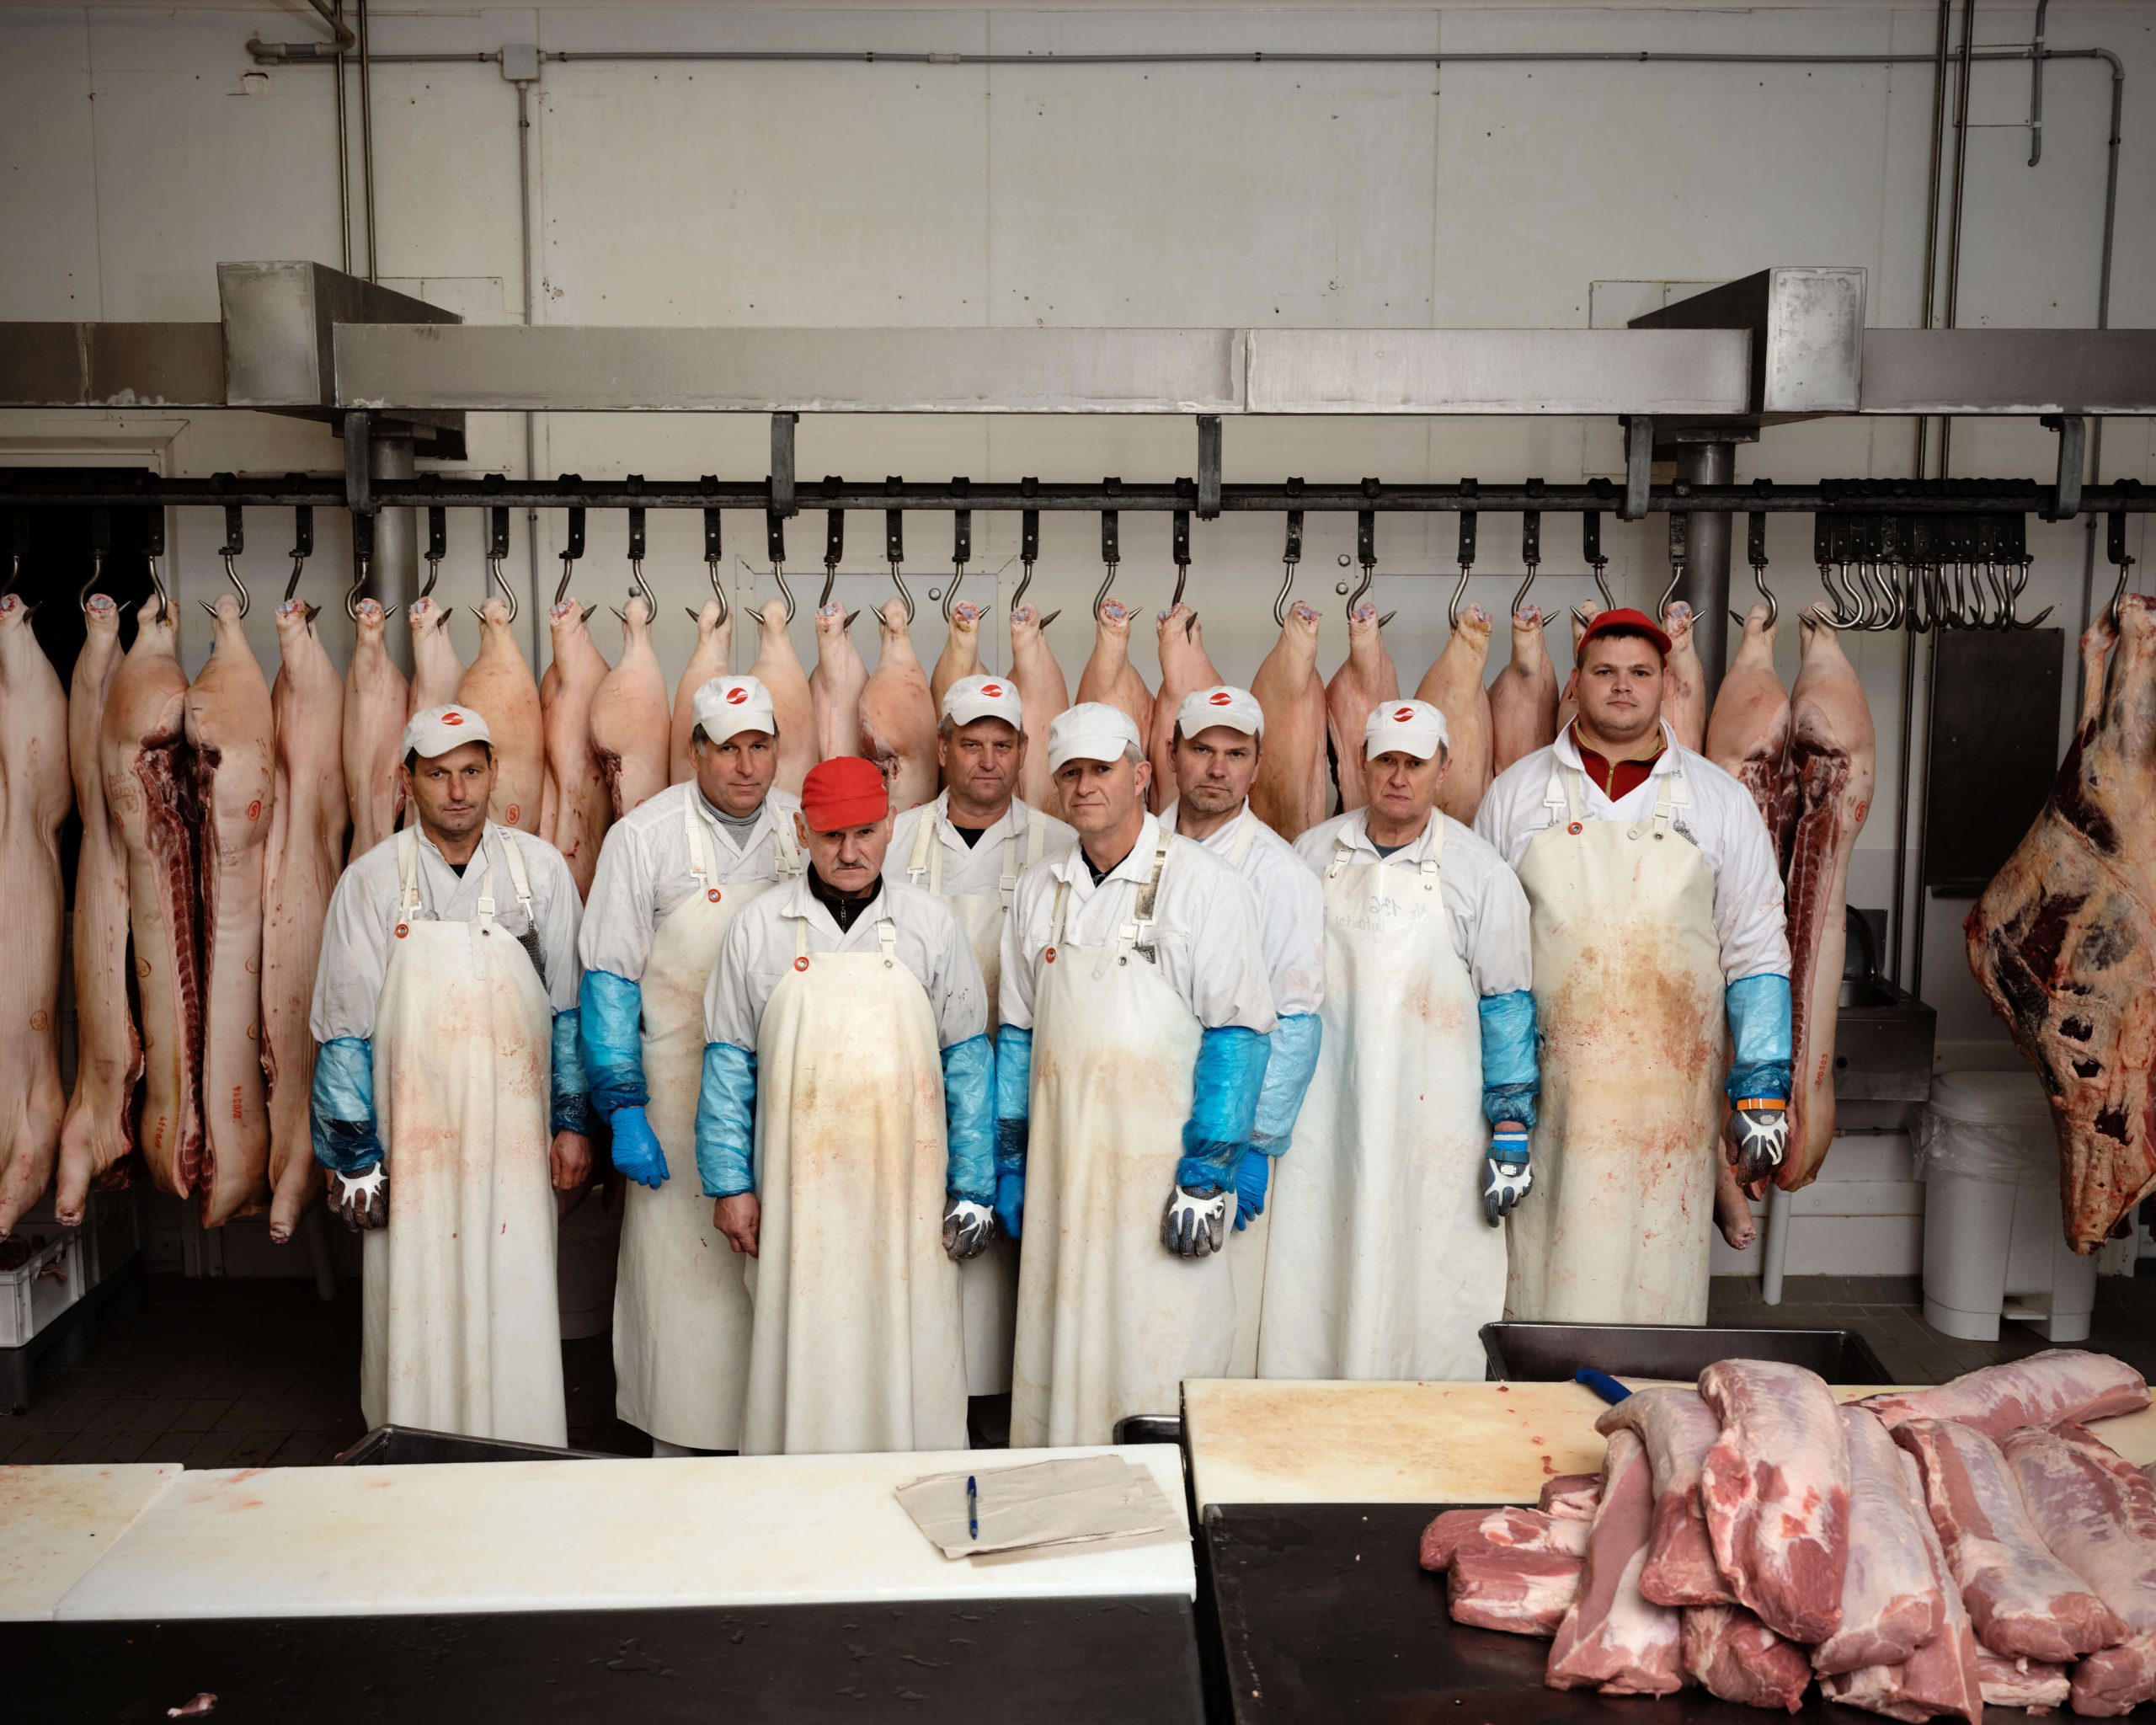 THE EUROPEANS - Arnold van Bruggen & Rob Hornstra the south west collective of photography ltd butchers stood with meat on hanging racks